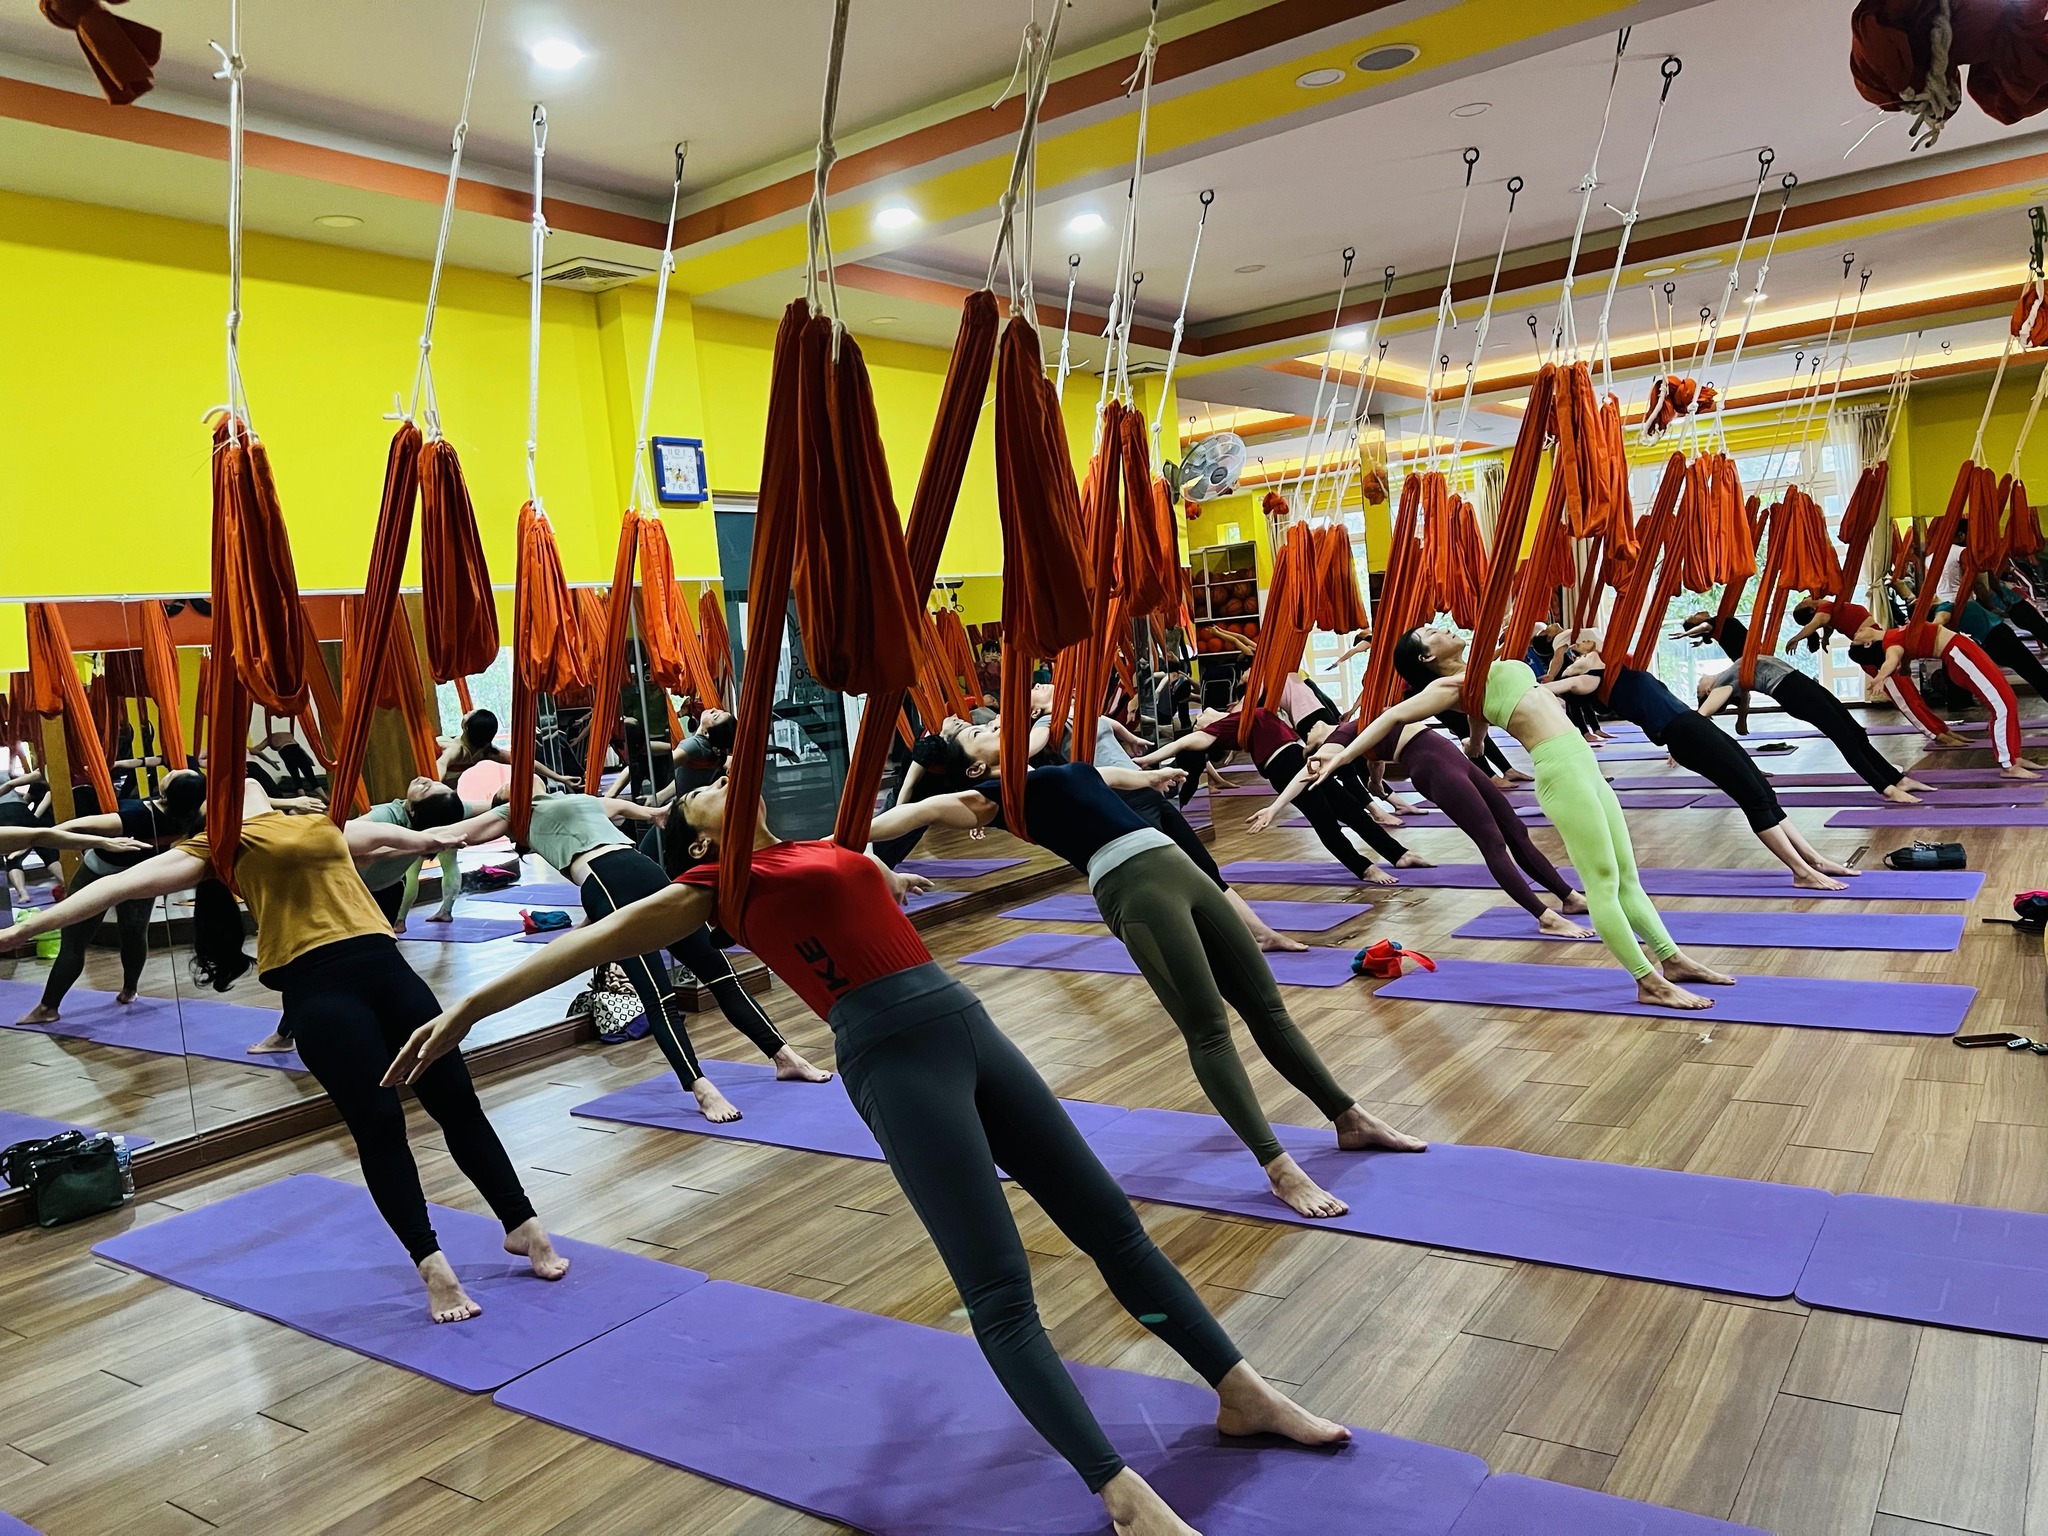 TAPO YOGA & Health Academy By Master Sure ảnh 1